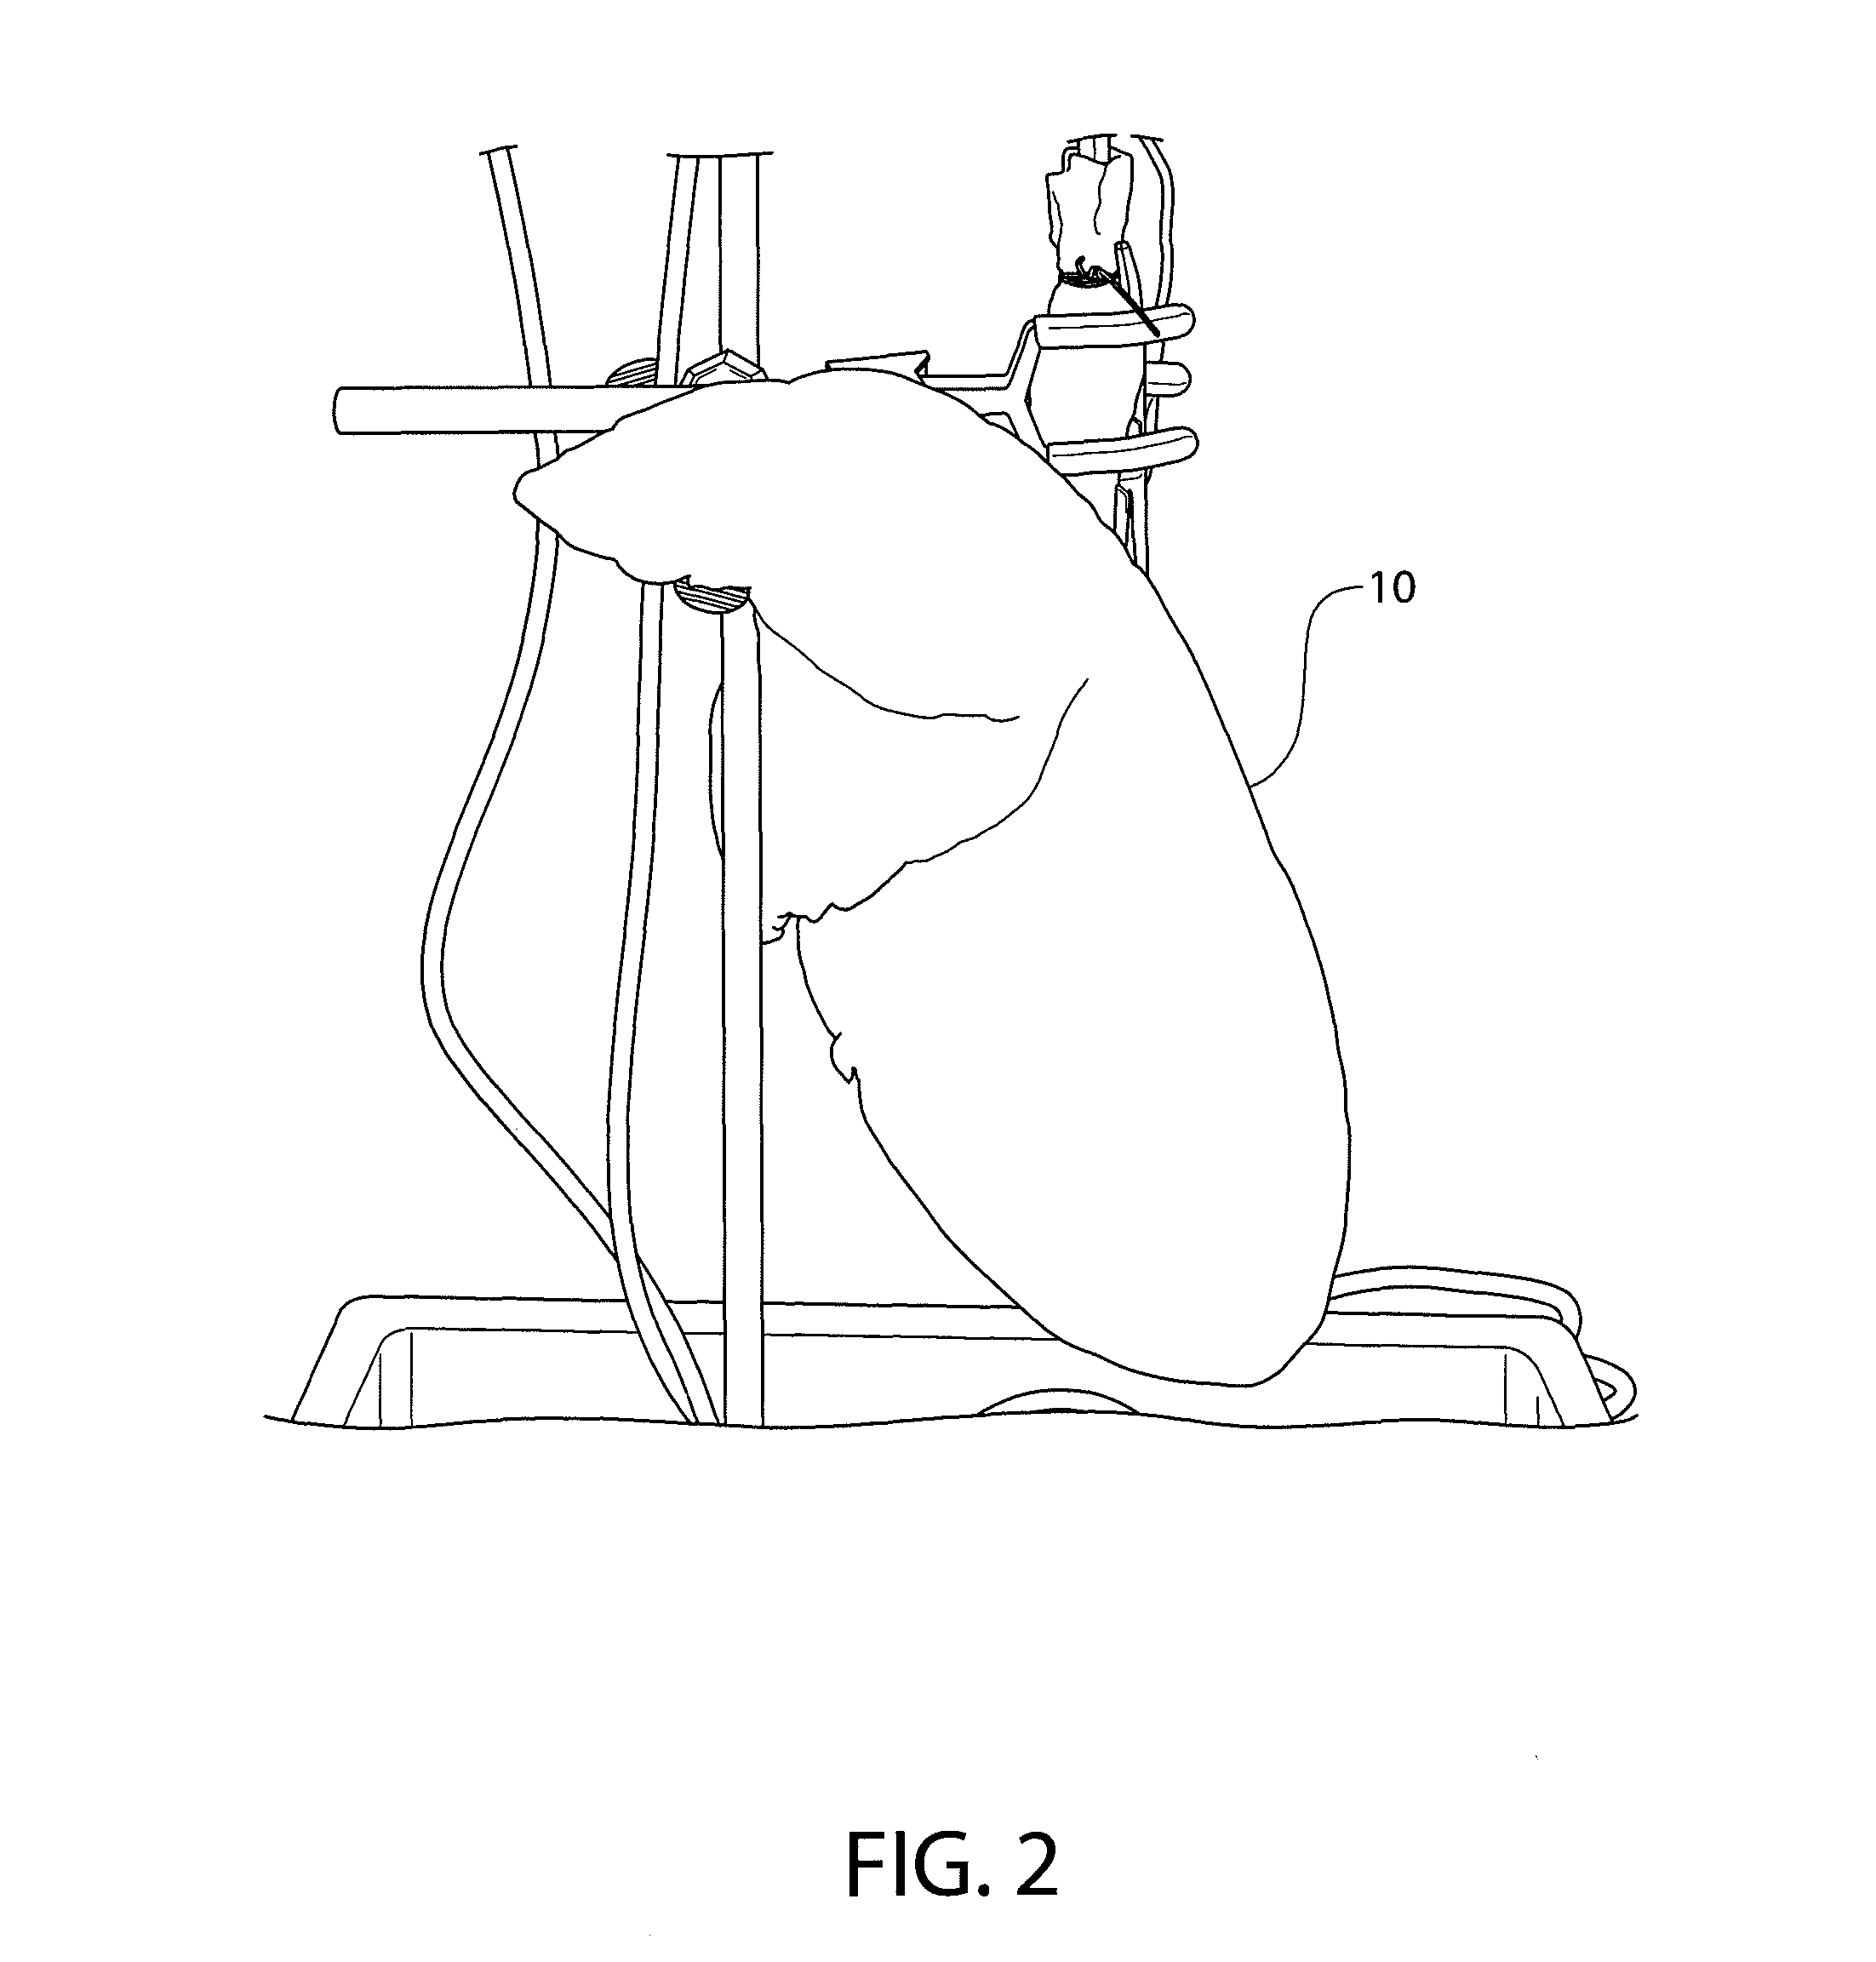 System and method for detection and repair of pulmonary air leaks